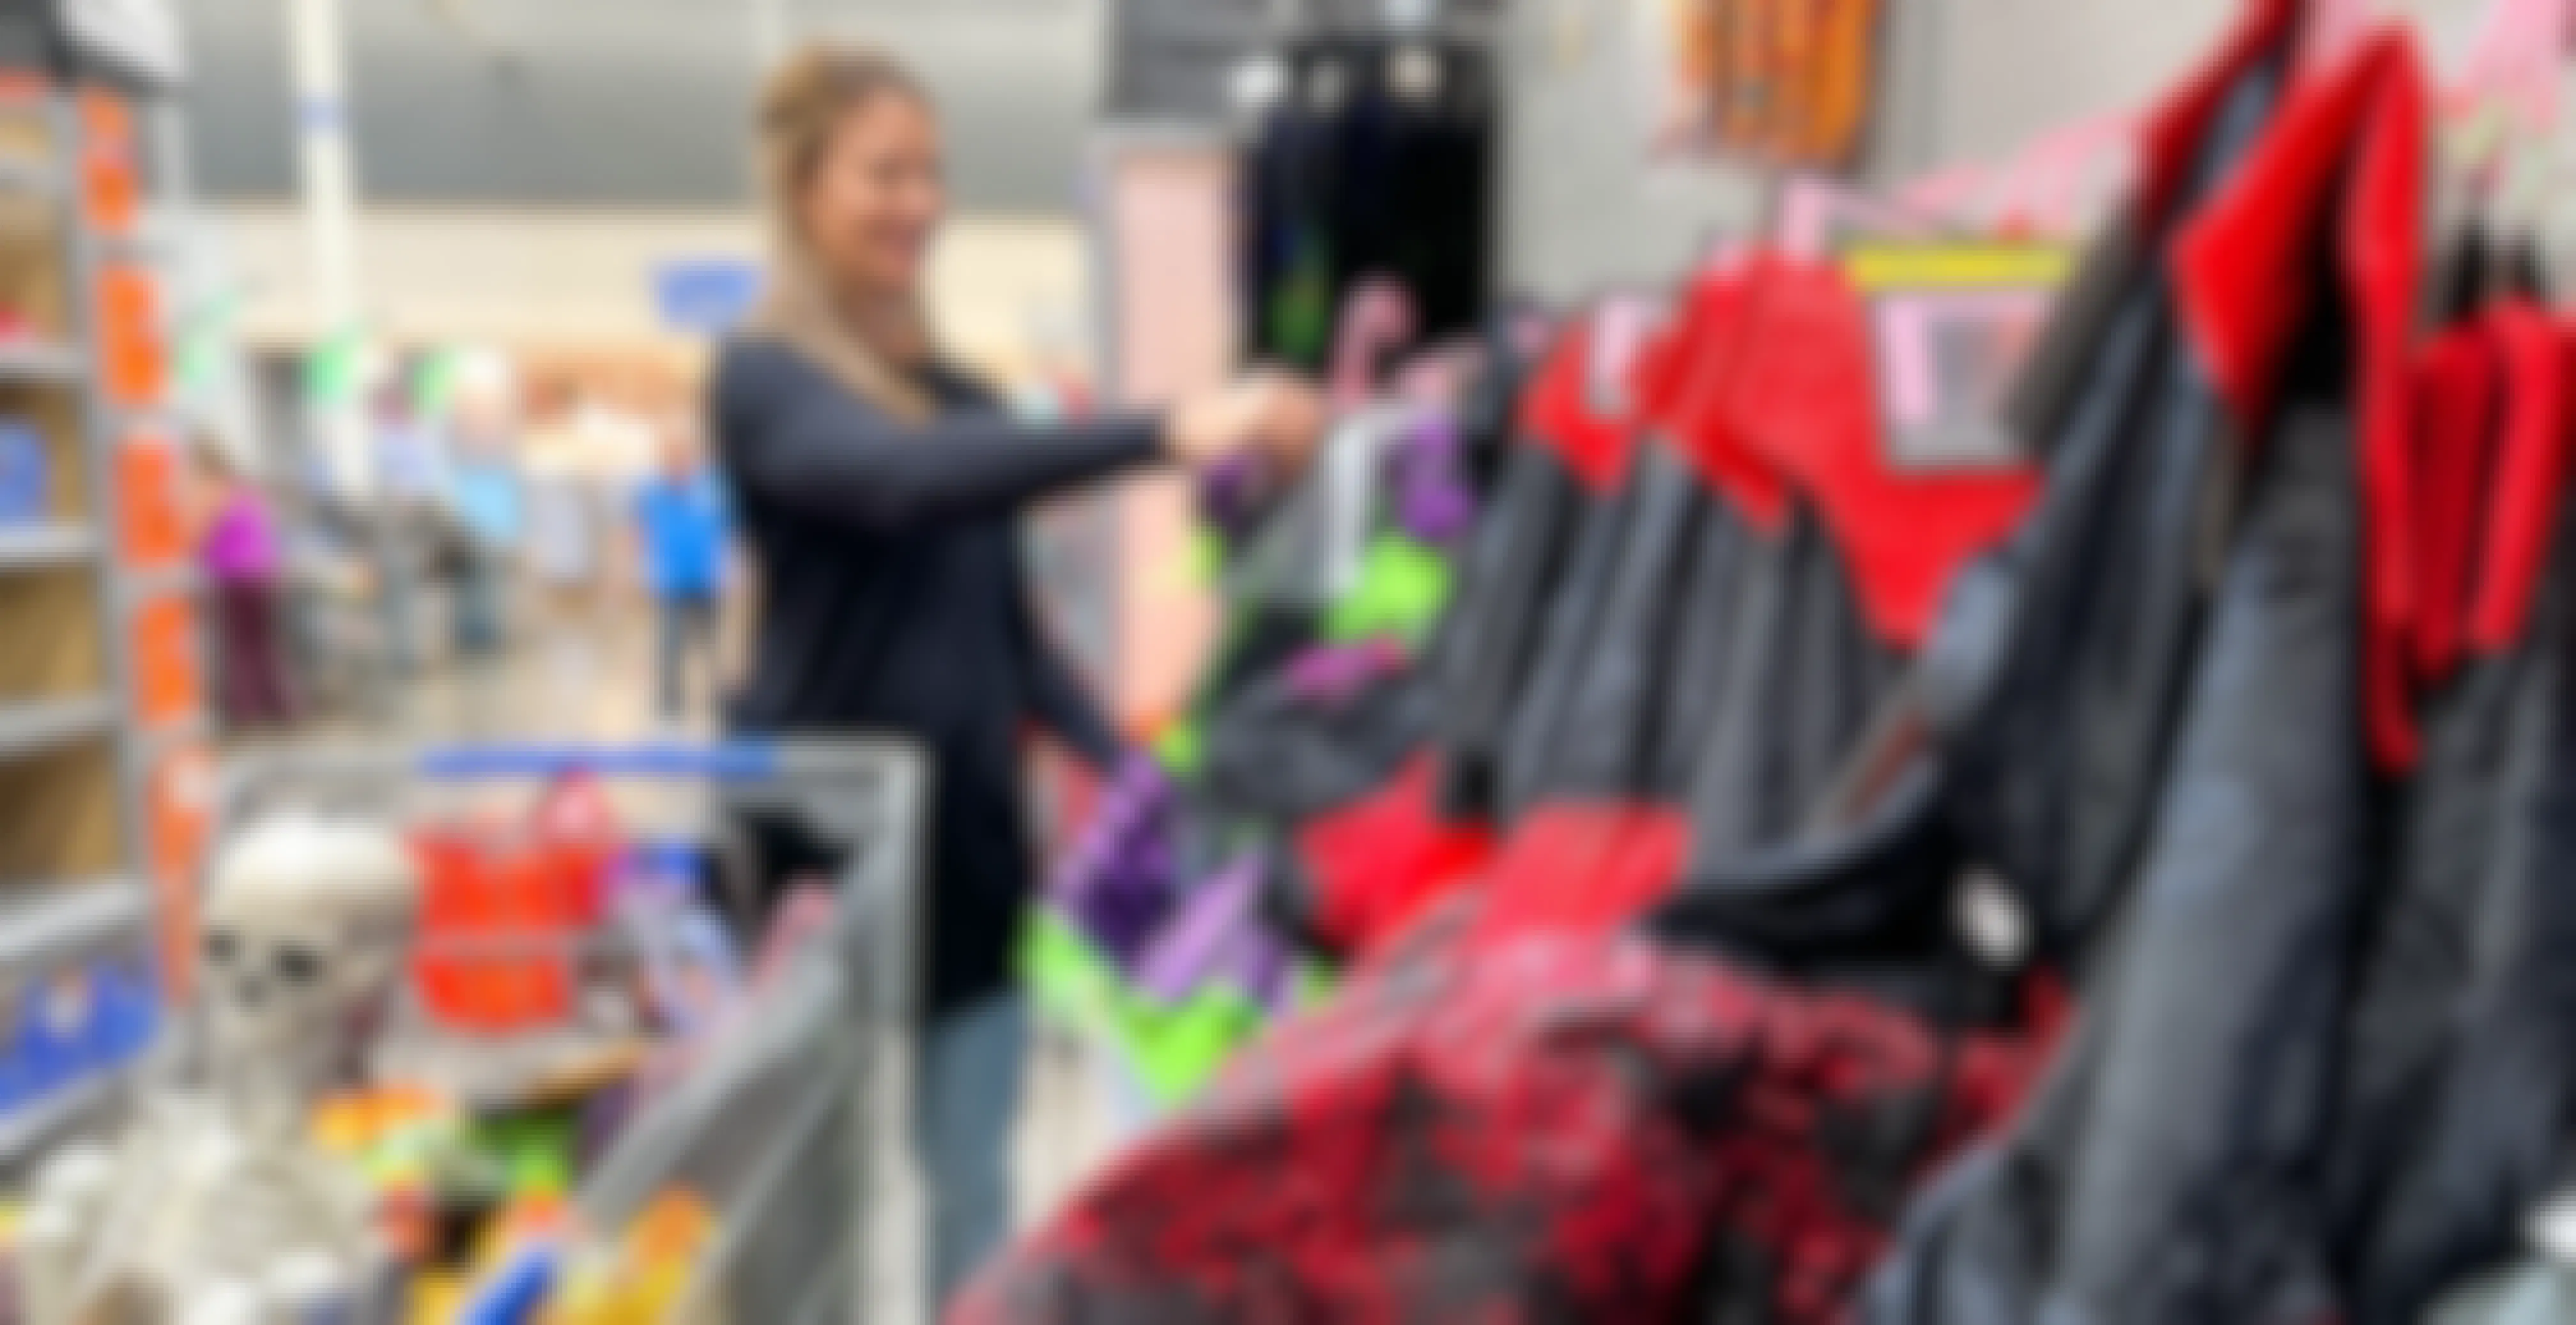 Walmart Halloween Costumes Are Here — Starting at $5 Each